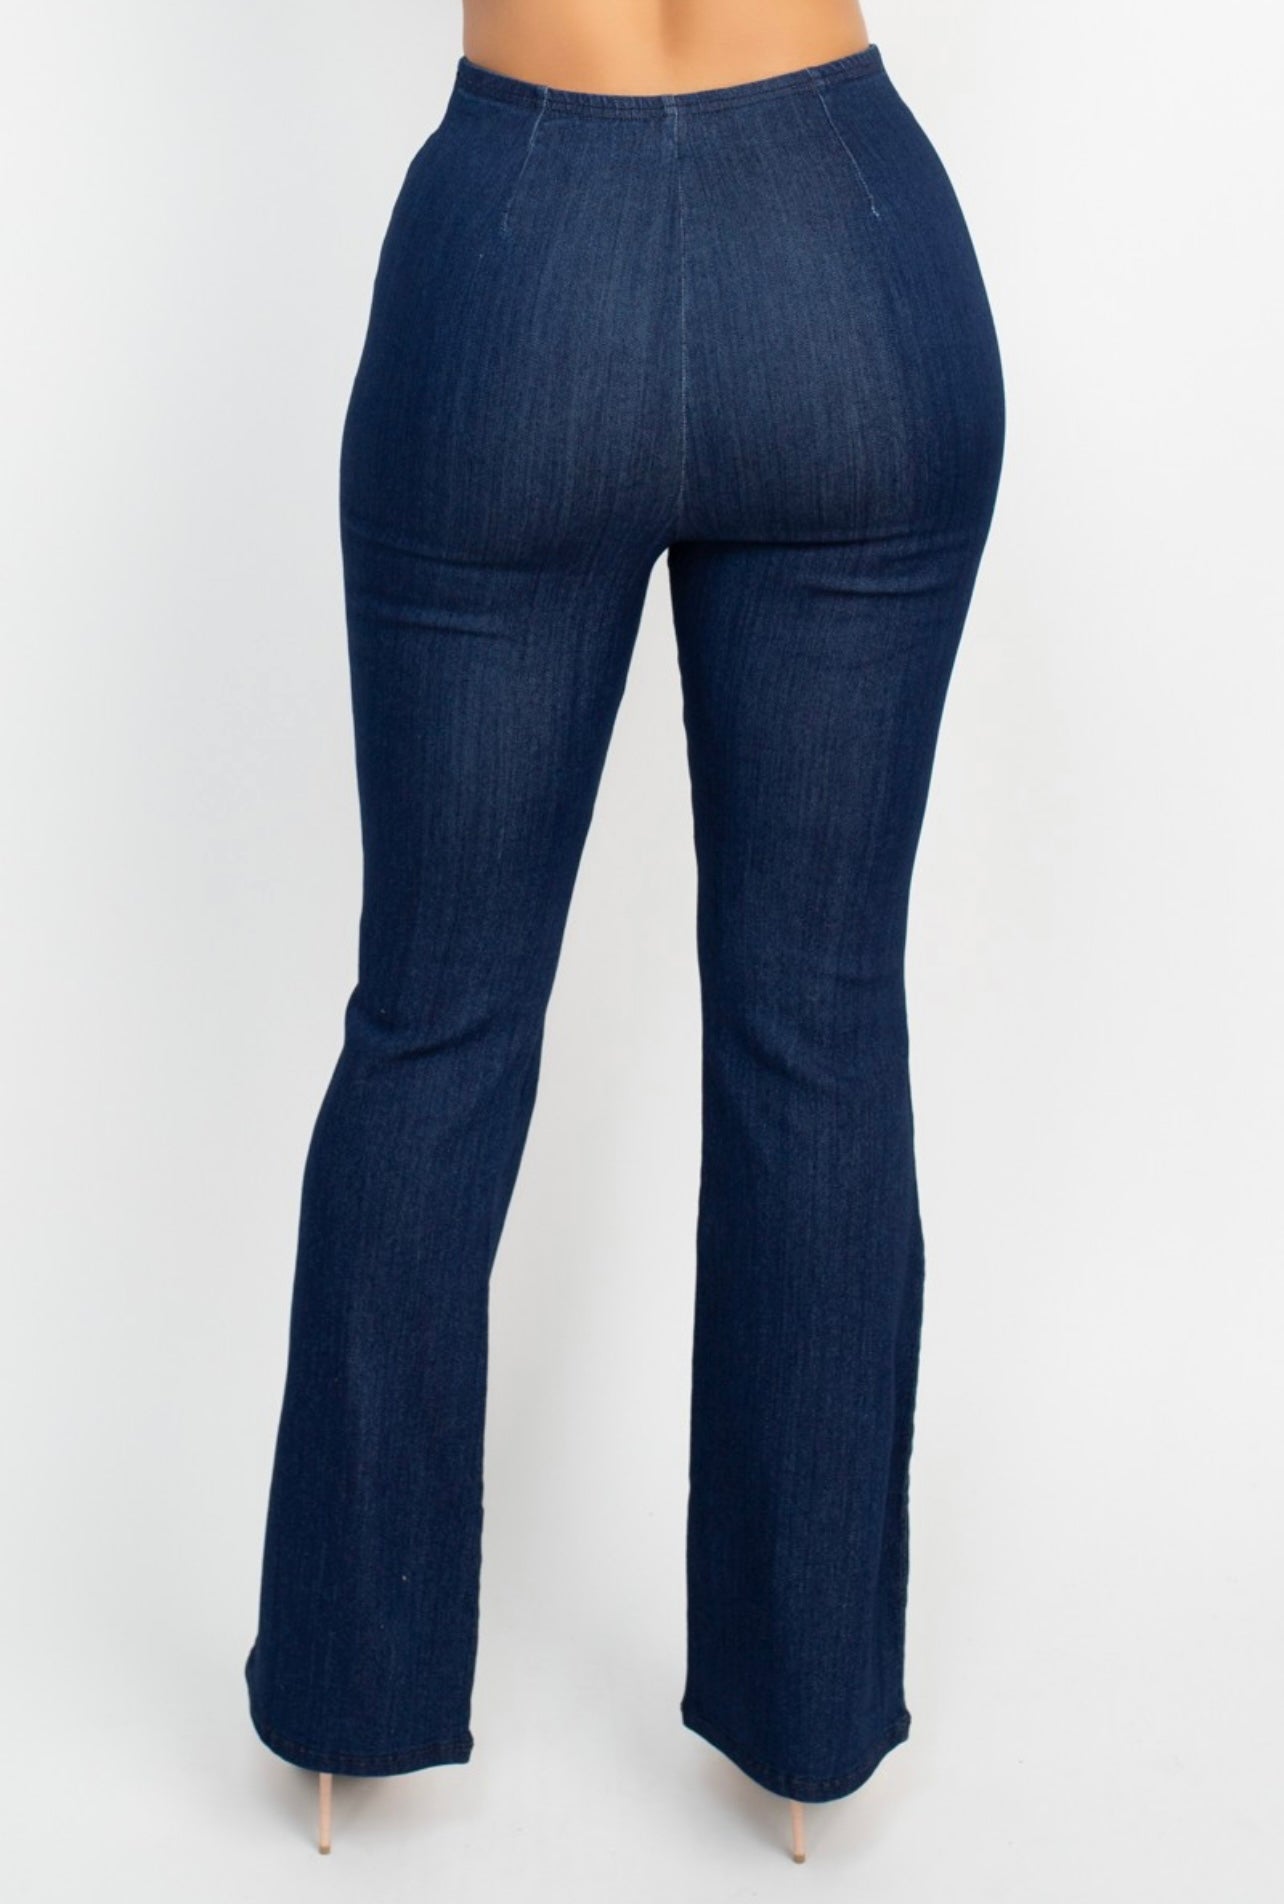 Rosa Flared Jeans